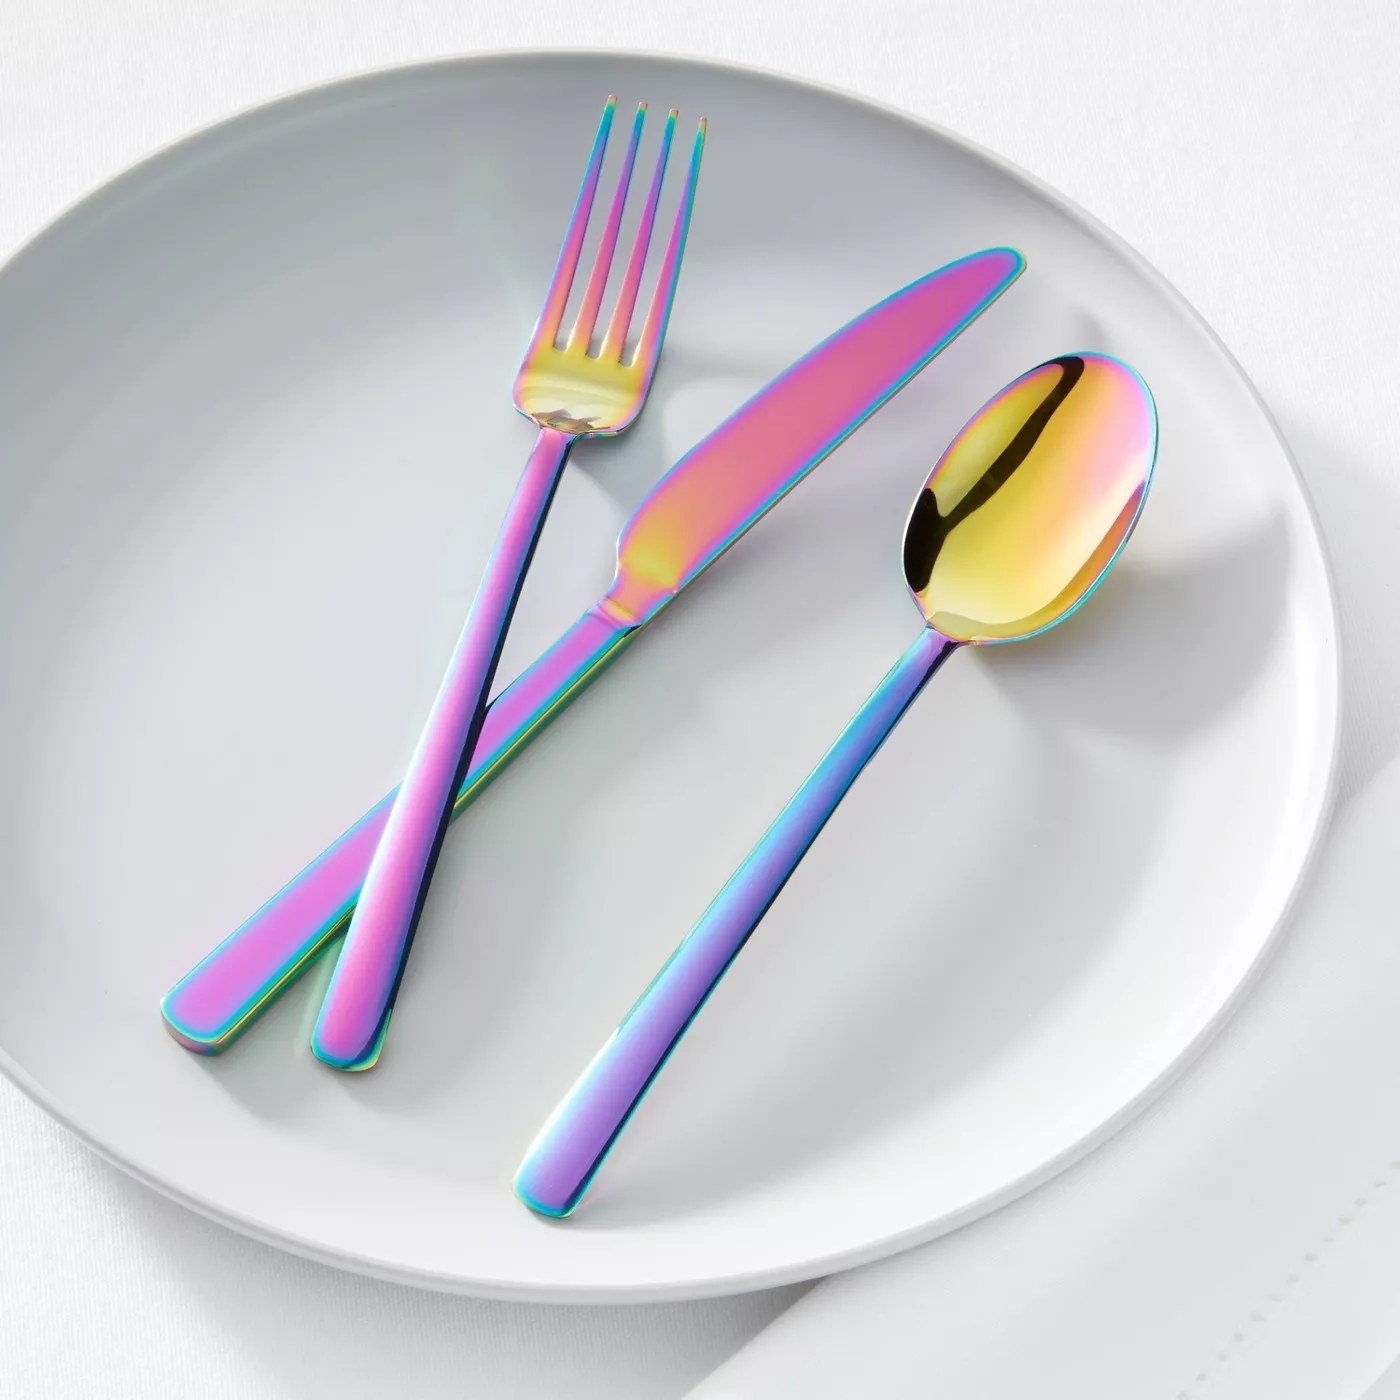 A fork, knife and spoon from the rainbow flatware set on a plate